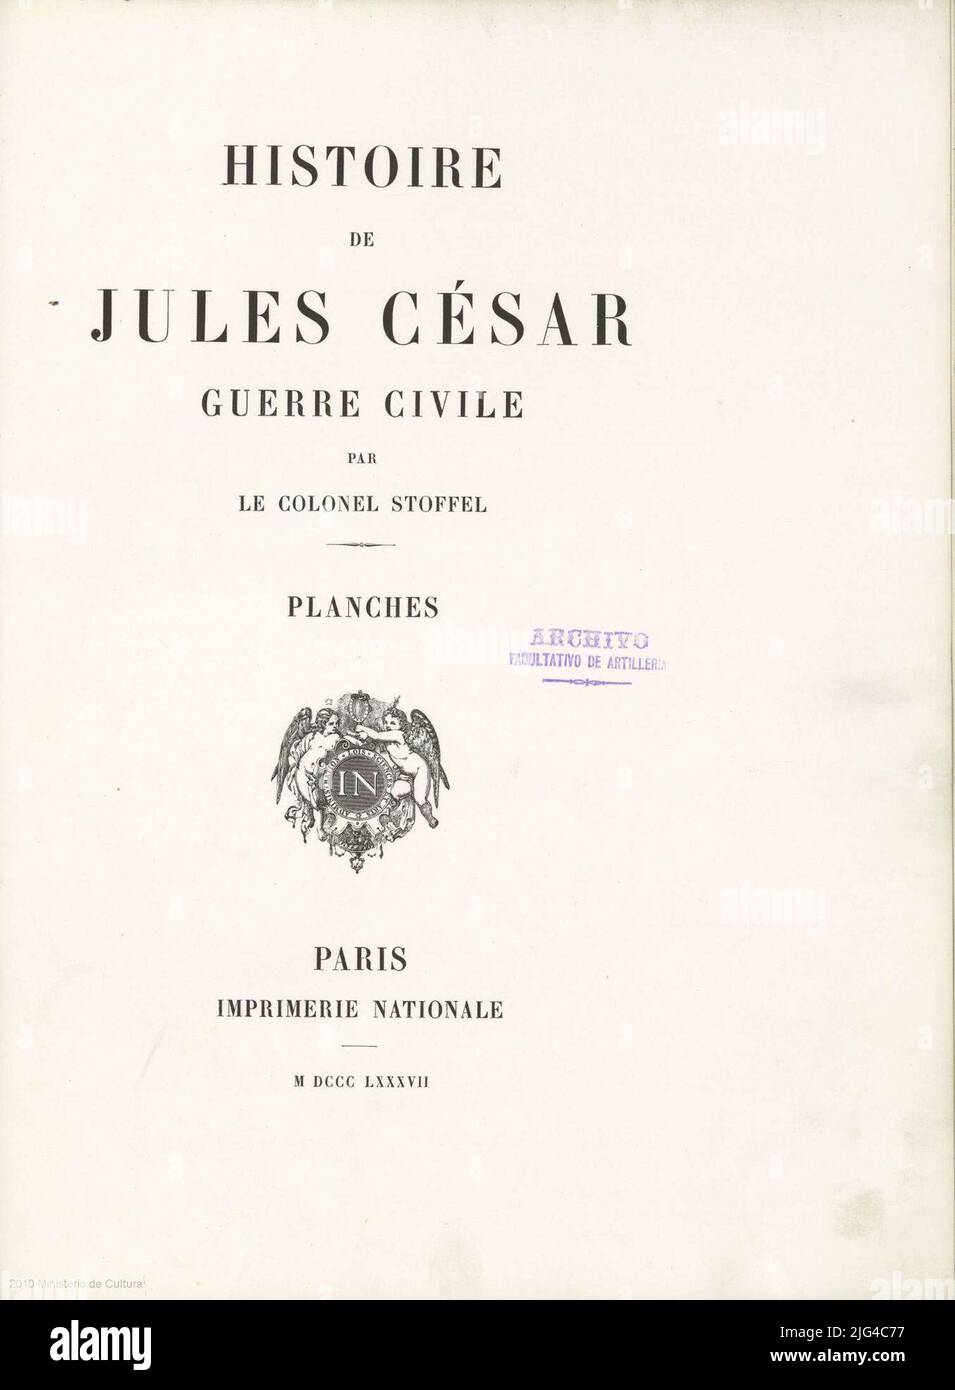 History of Julius Caesar: Civil War: Planches: [Atlas]. Bound in green tone cardboard with leather contains maps index also includes: Your Lleida et Mequinenza. César et d'Angranius Bataille Lignes. Machines de Siége.vues de Palatest et d'Oricum. Your du Durazzo et pharsale. Bataille Lignes à Pharsale. RUSPINA BATAILLE Digital copy. Madrid: Ministry of Culture. General Directorate of the Book, Archives and Libraries, 2010 Stock Photo